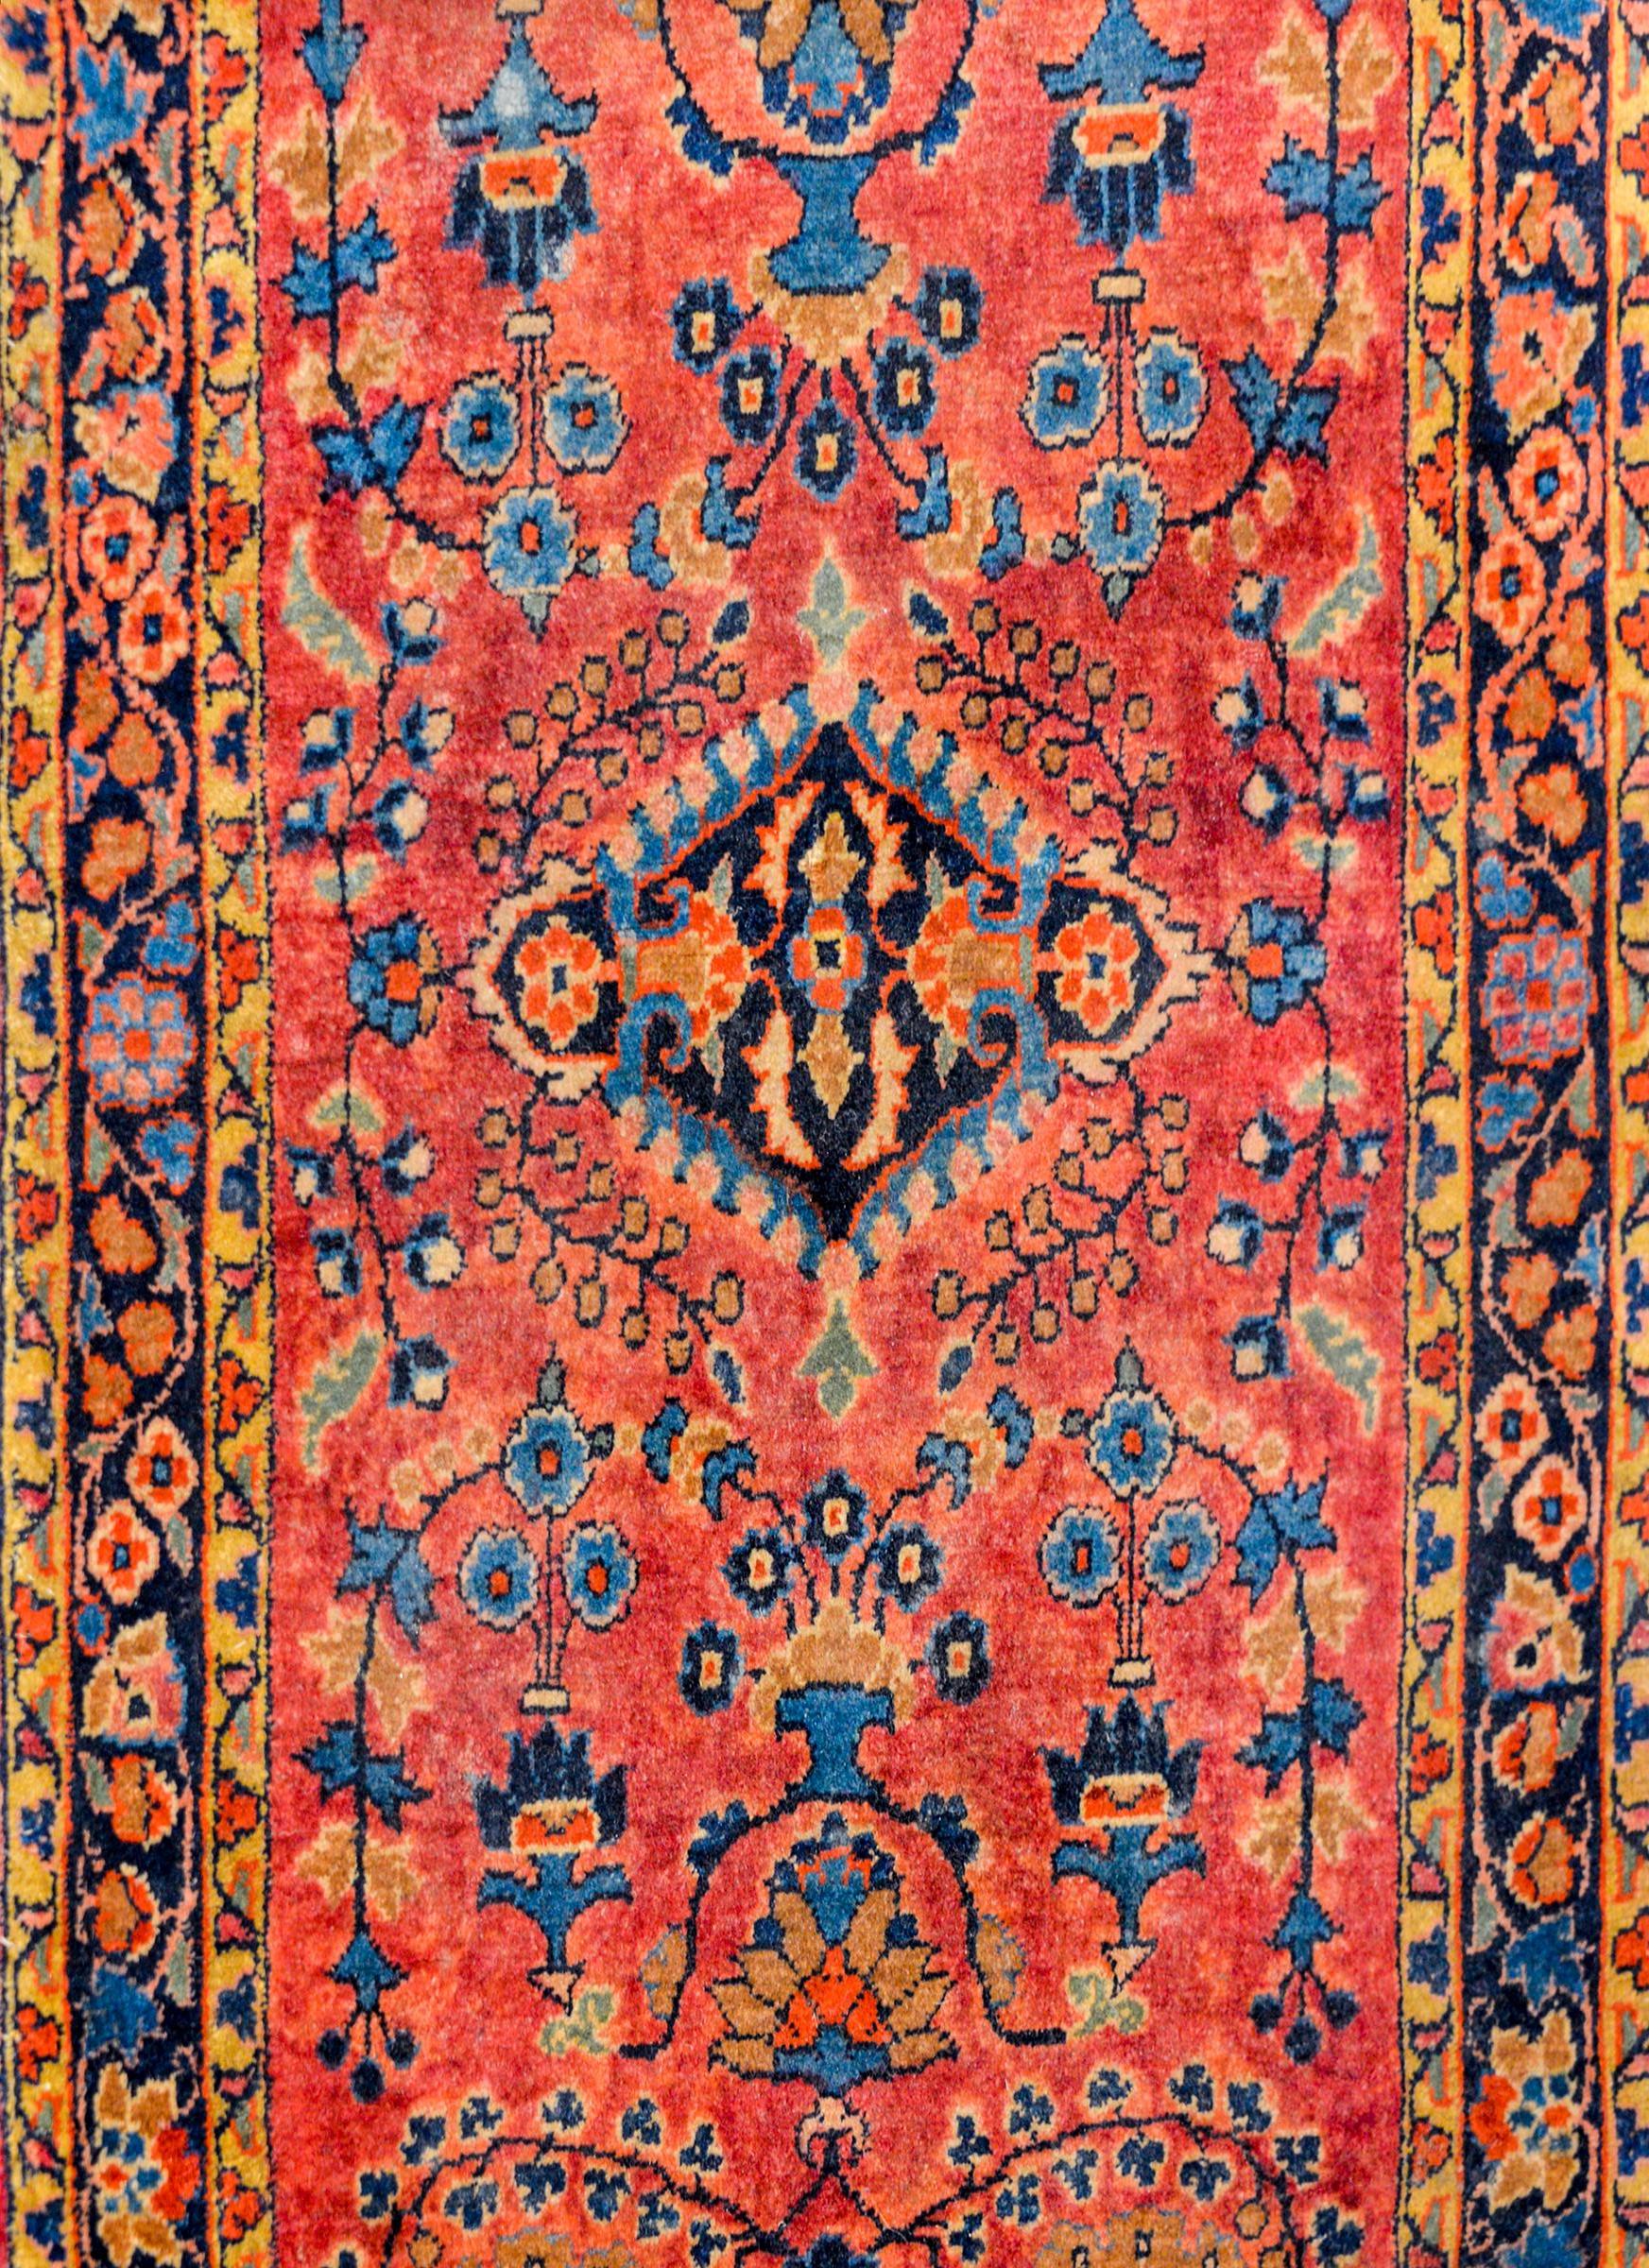 An early 20th century Persian Sarouk Mohajeran rug with a wonderful mirrored floral and vine pattern, woven in light and dark indigo, gold, pink, and crimson on a cranberry colored background. The border is simple, with a thin floral patterned